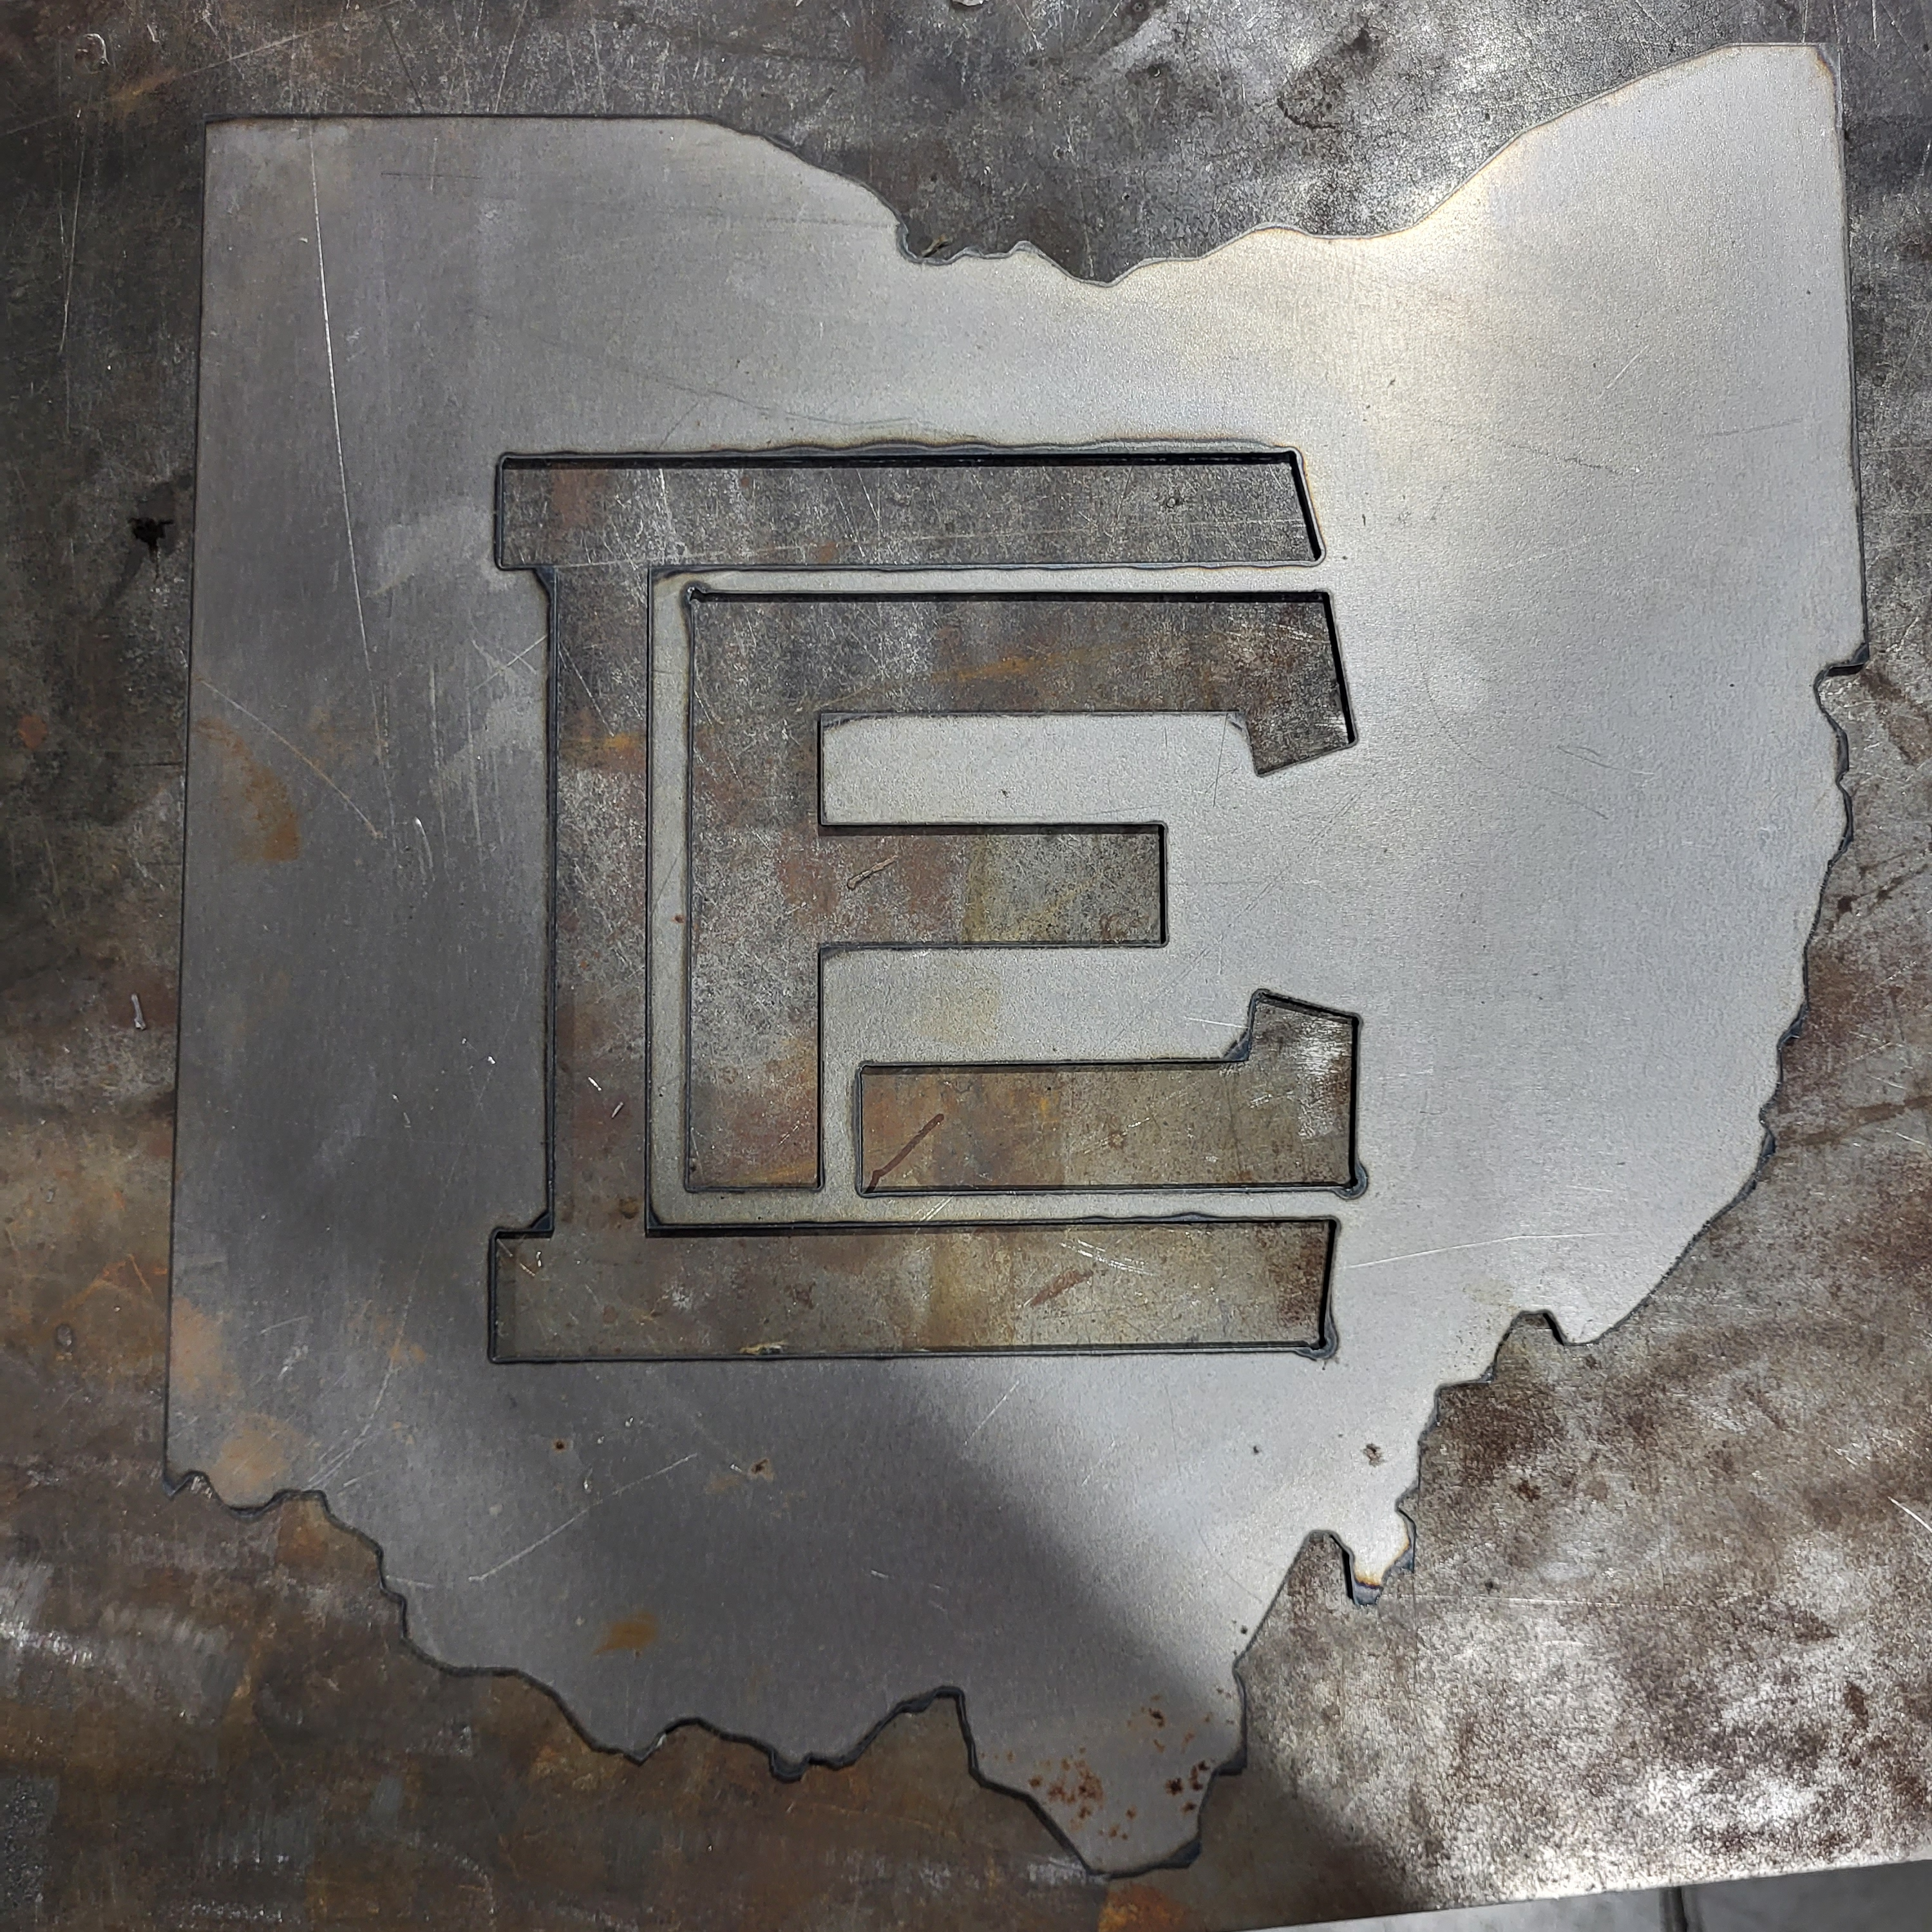 A piece of sheet metal is cut to the shape of the State of Ohio with the EFCTS logo cut out in the middle.